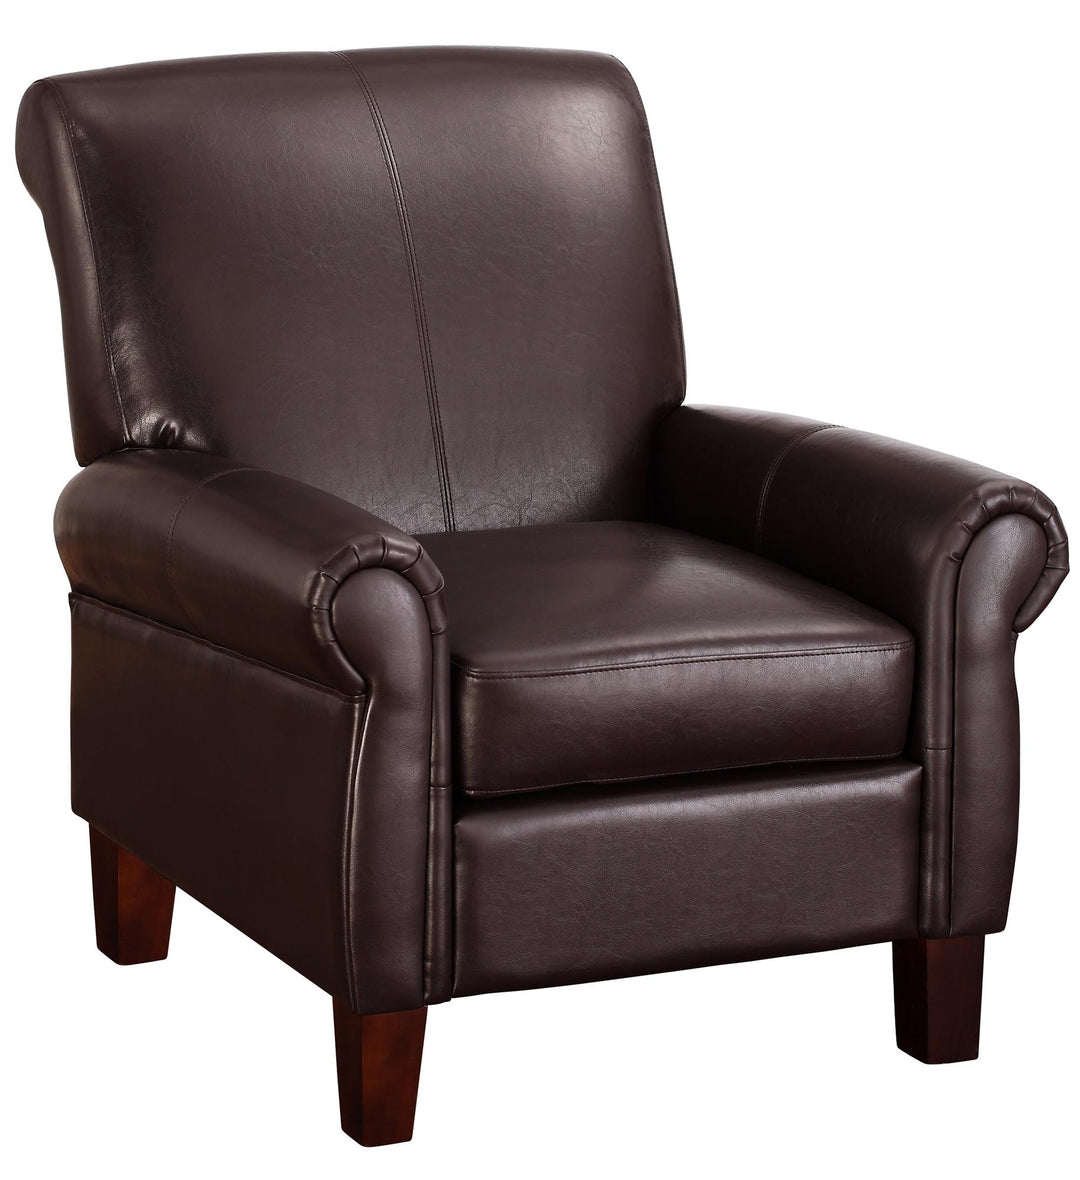 Comfortable faux leather club chair -  Brown